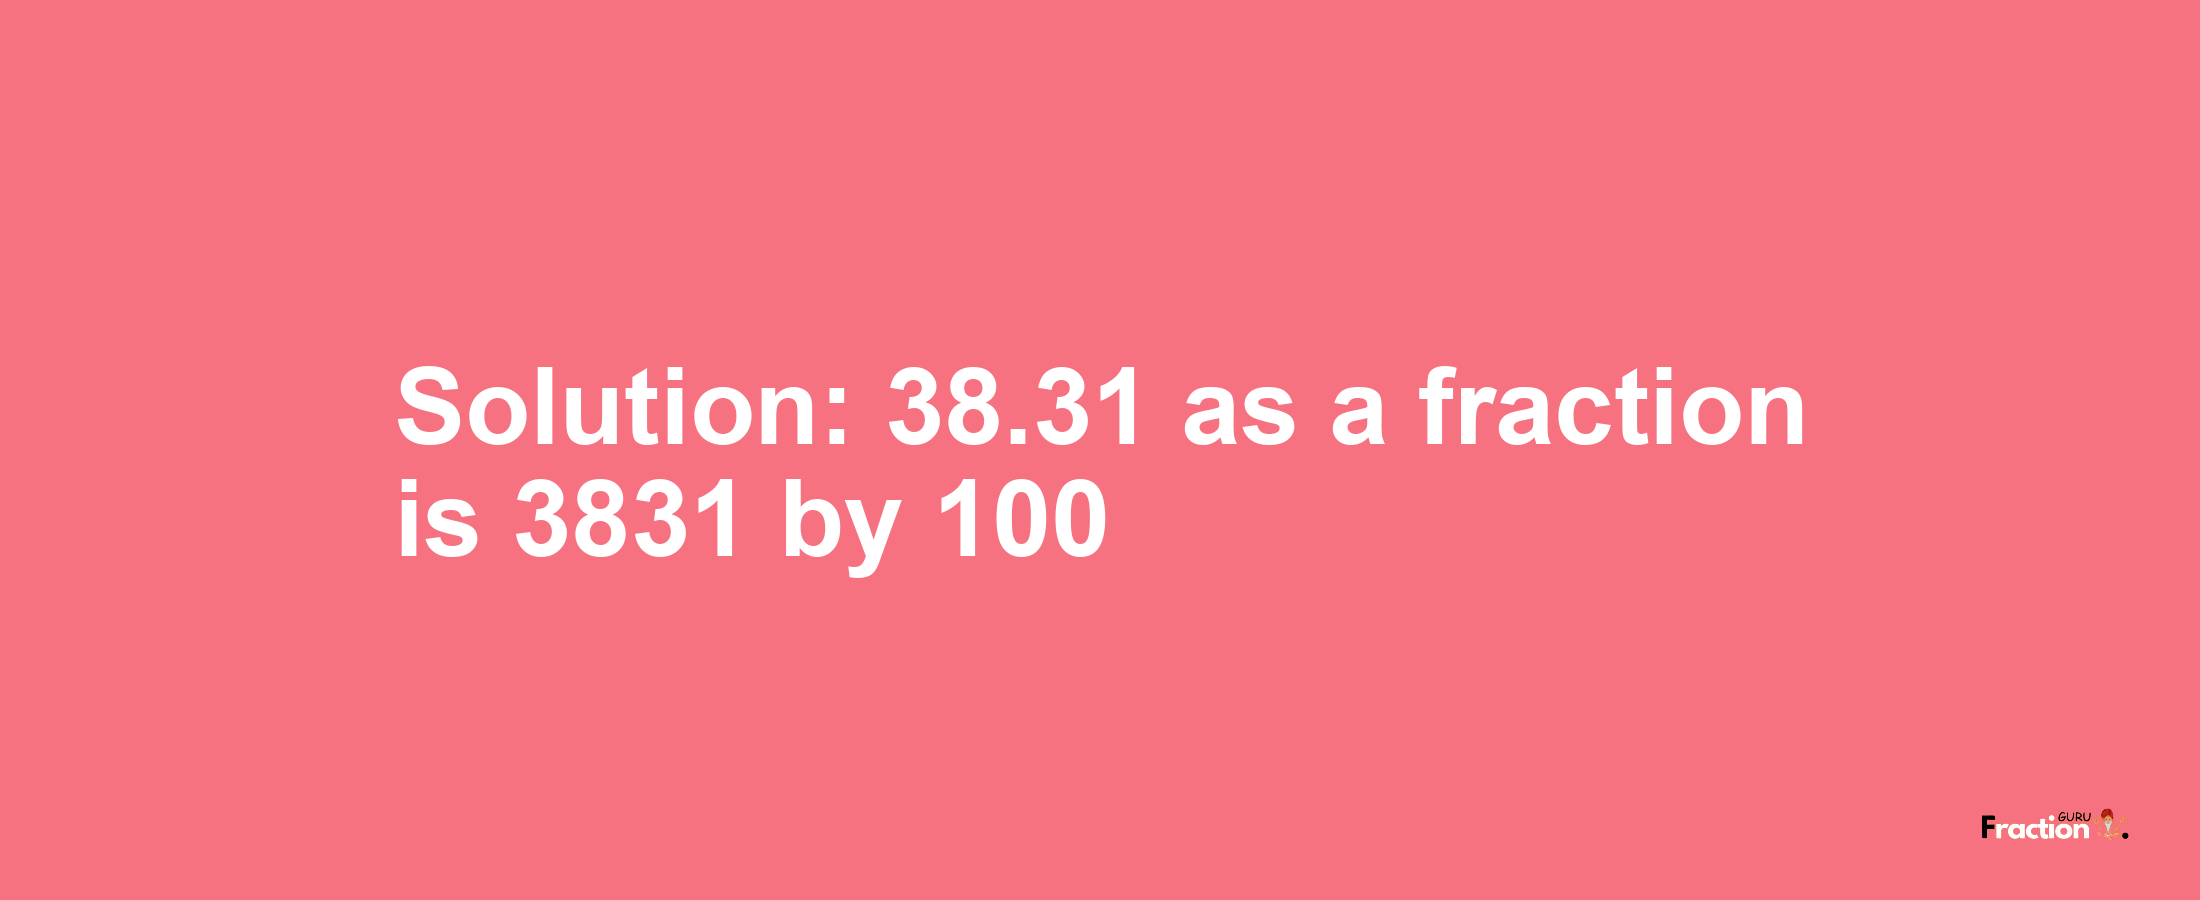 Solution:38.31 as a fraction is 3831/100